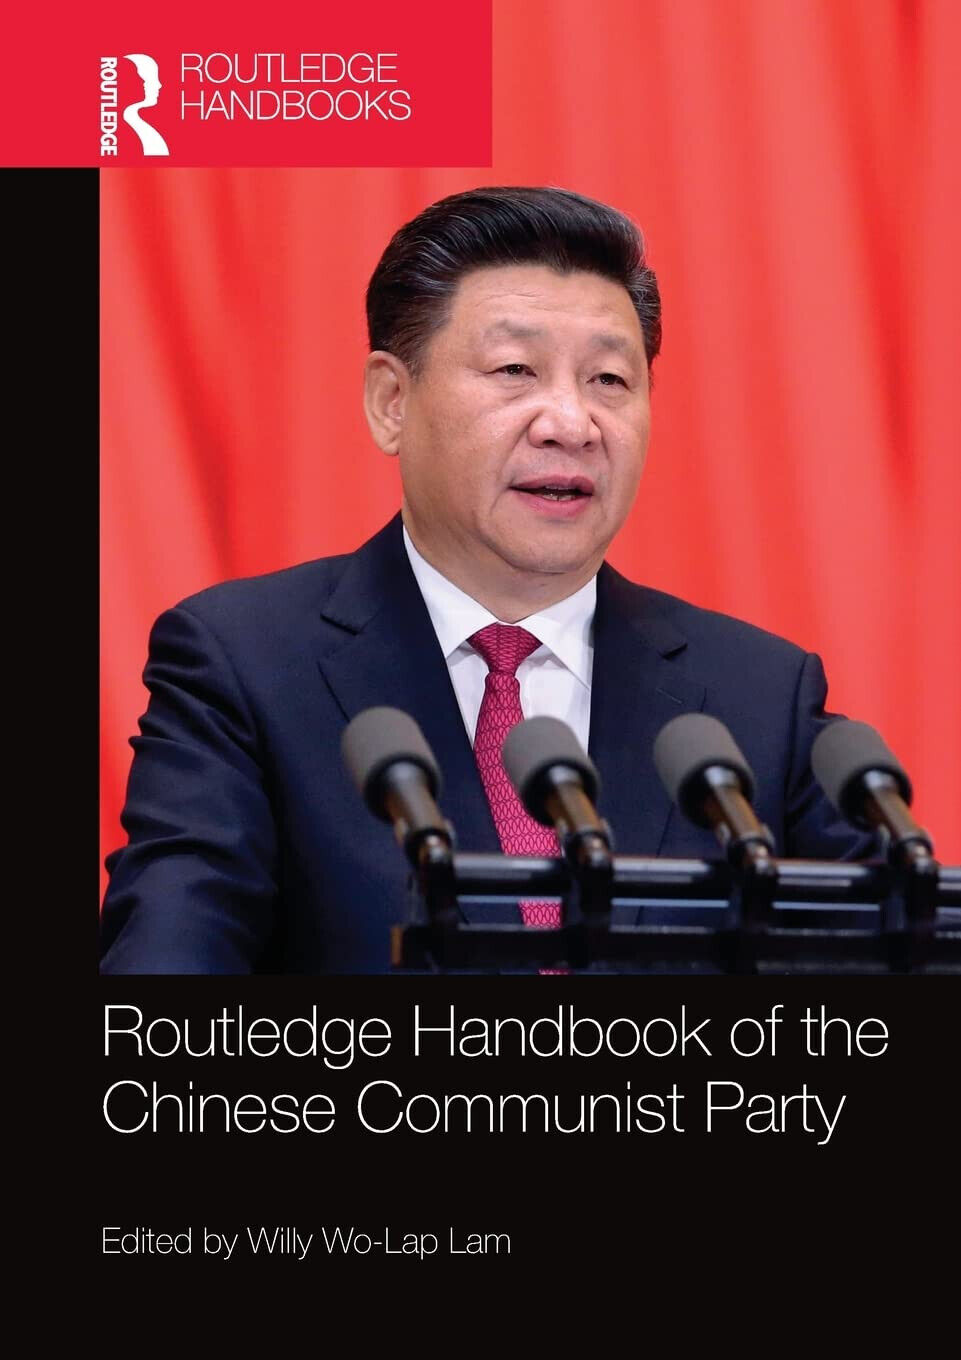 Routledge Handbook Of The Chinese Communist Party - Willy Wo-Lap Lam - 2020